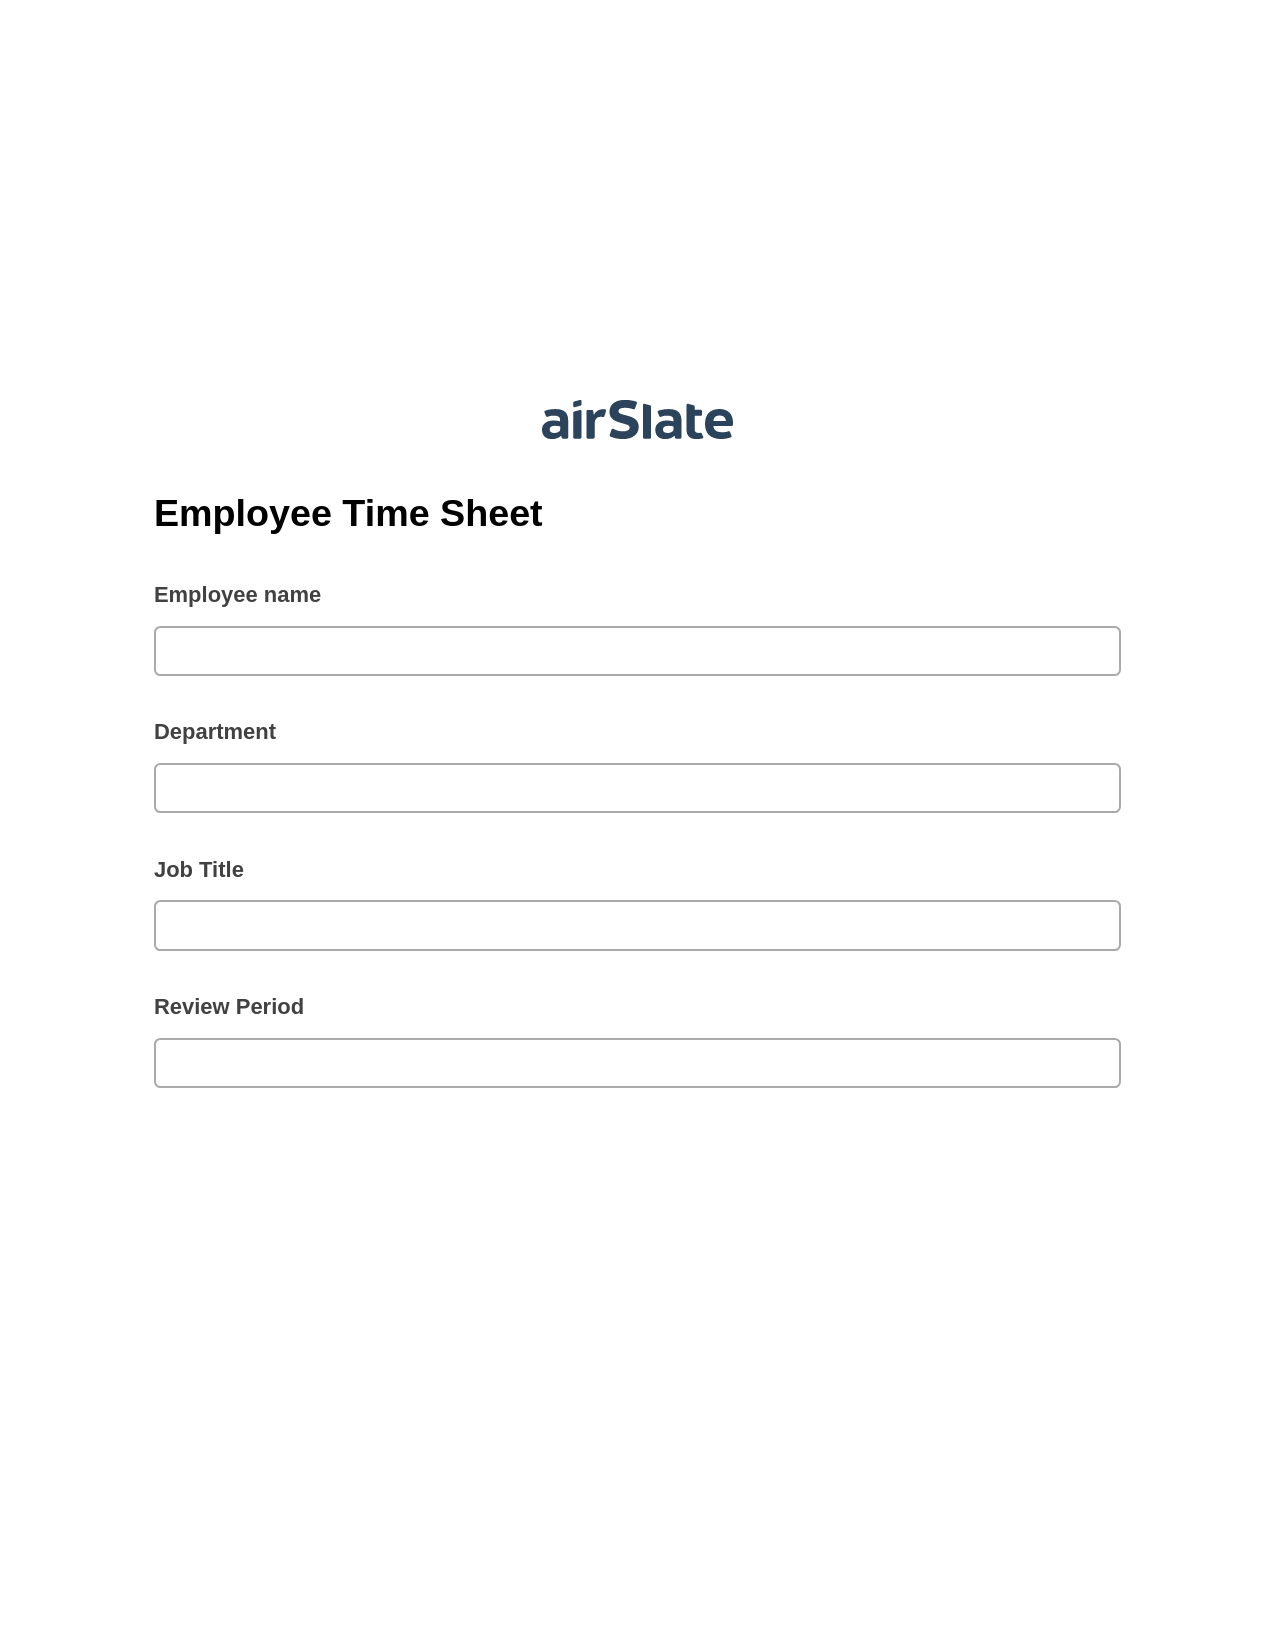 Employee Time Sheet Pre-fill Dropdowns from CSV file Bot, Create Salesforce Records Bot, Archive to OneDrive Bot